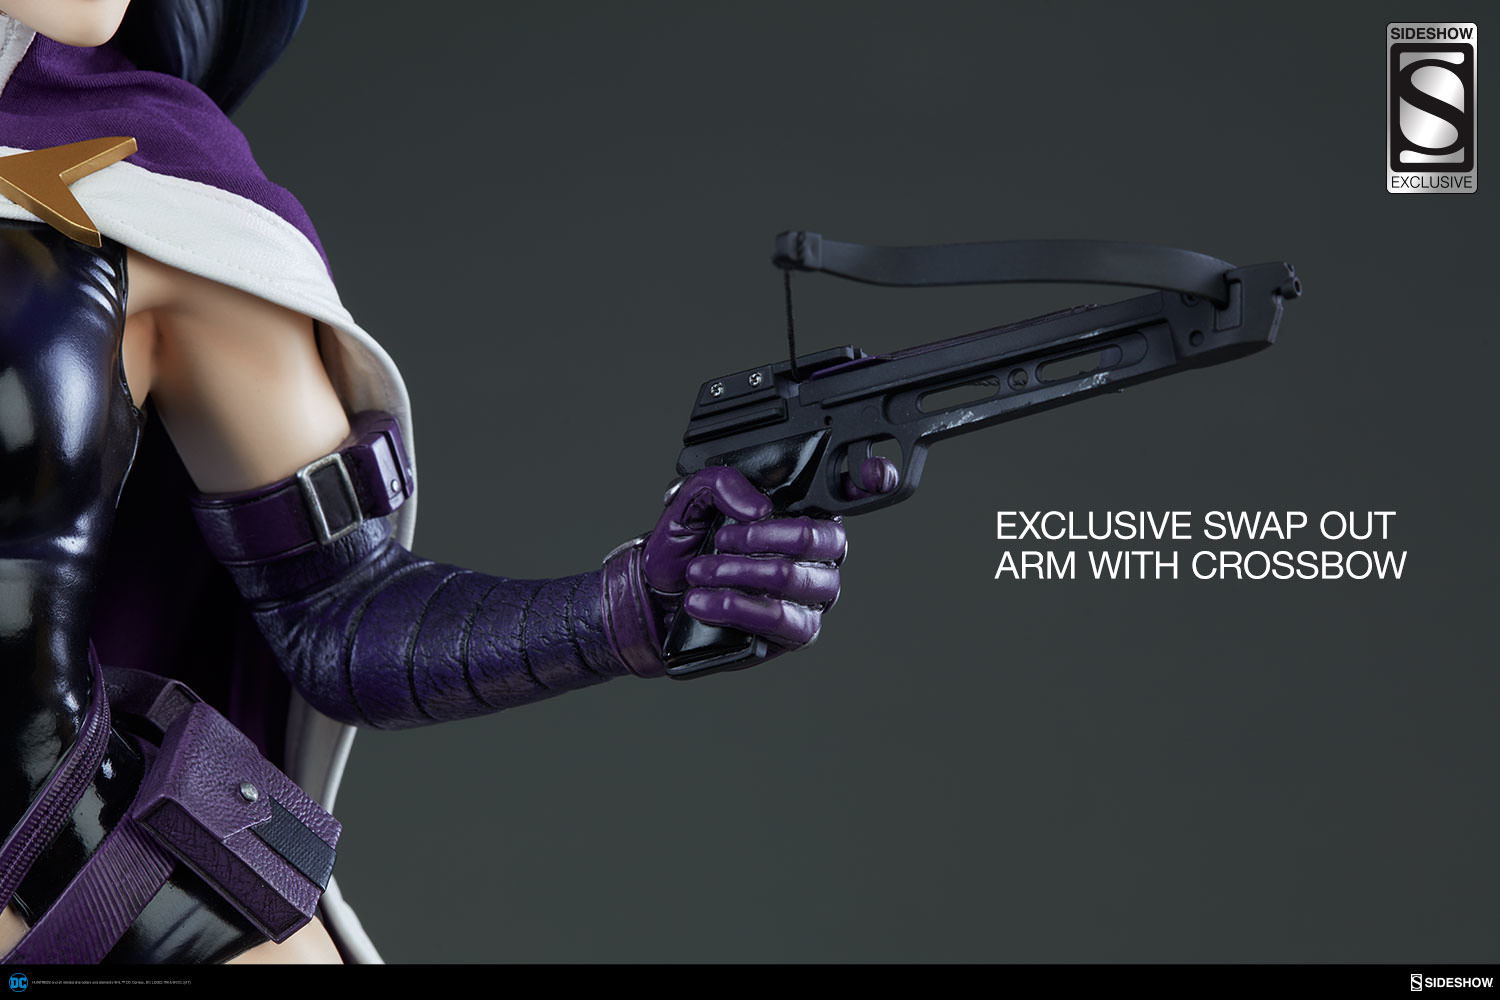 Huntress Exclusive Edition - Prototype Shown